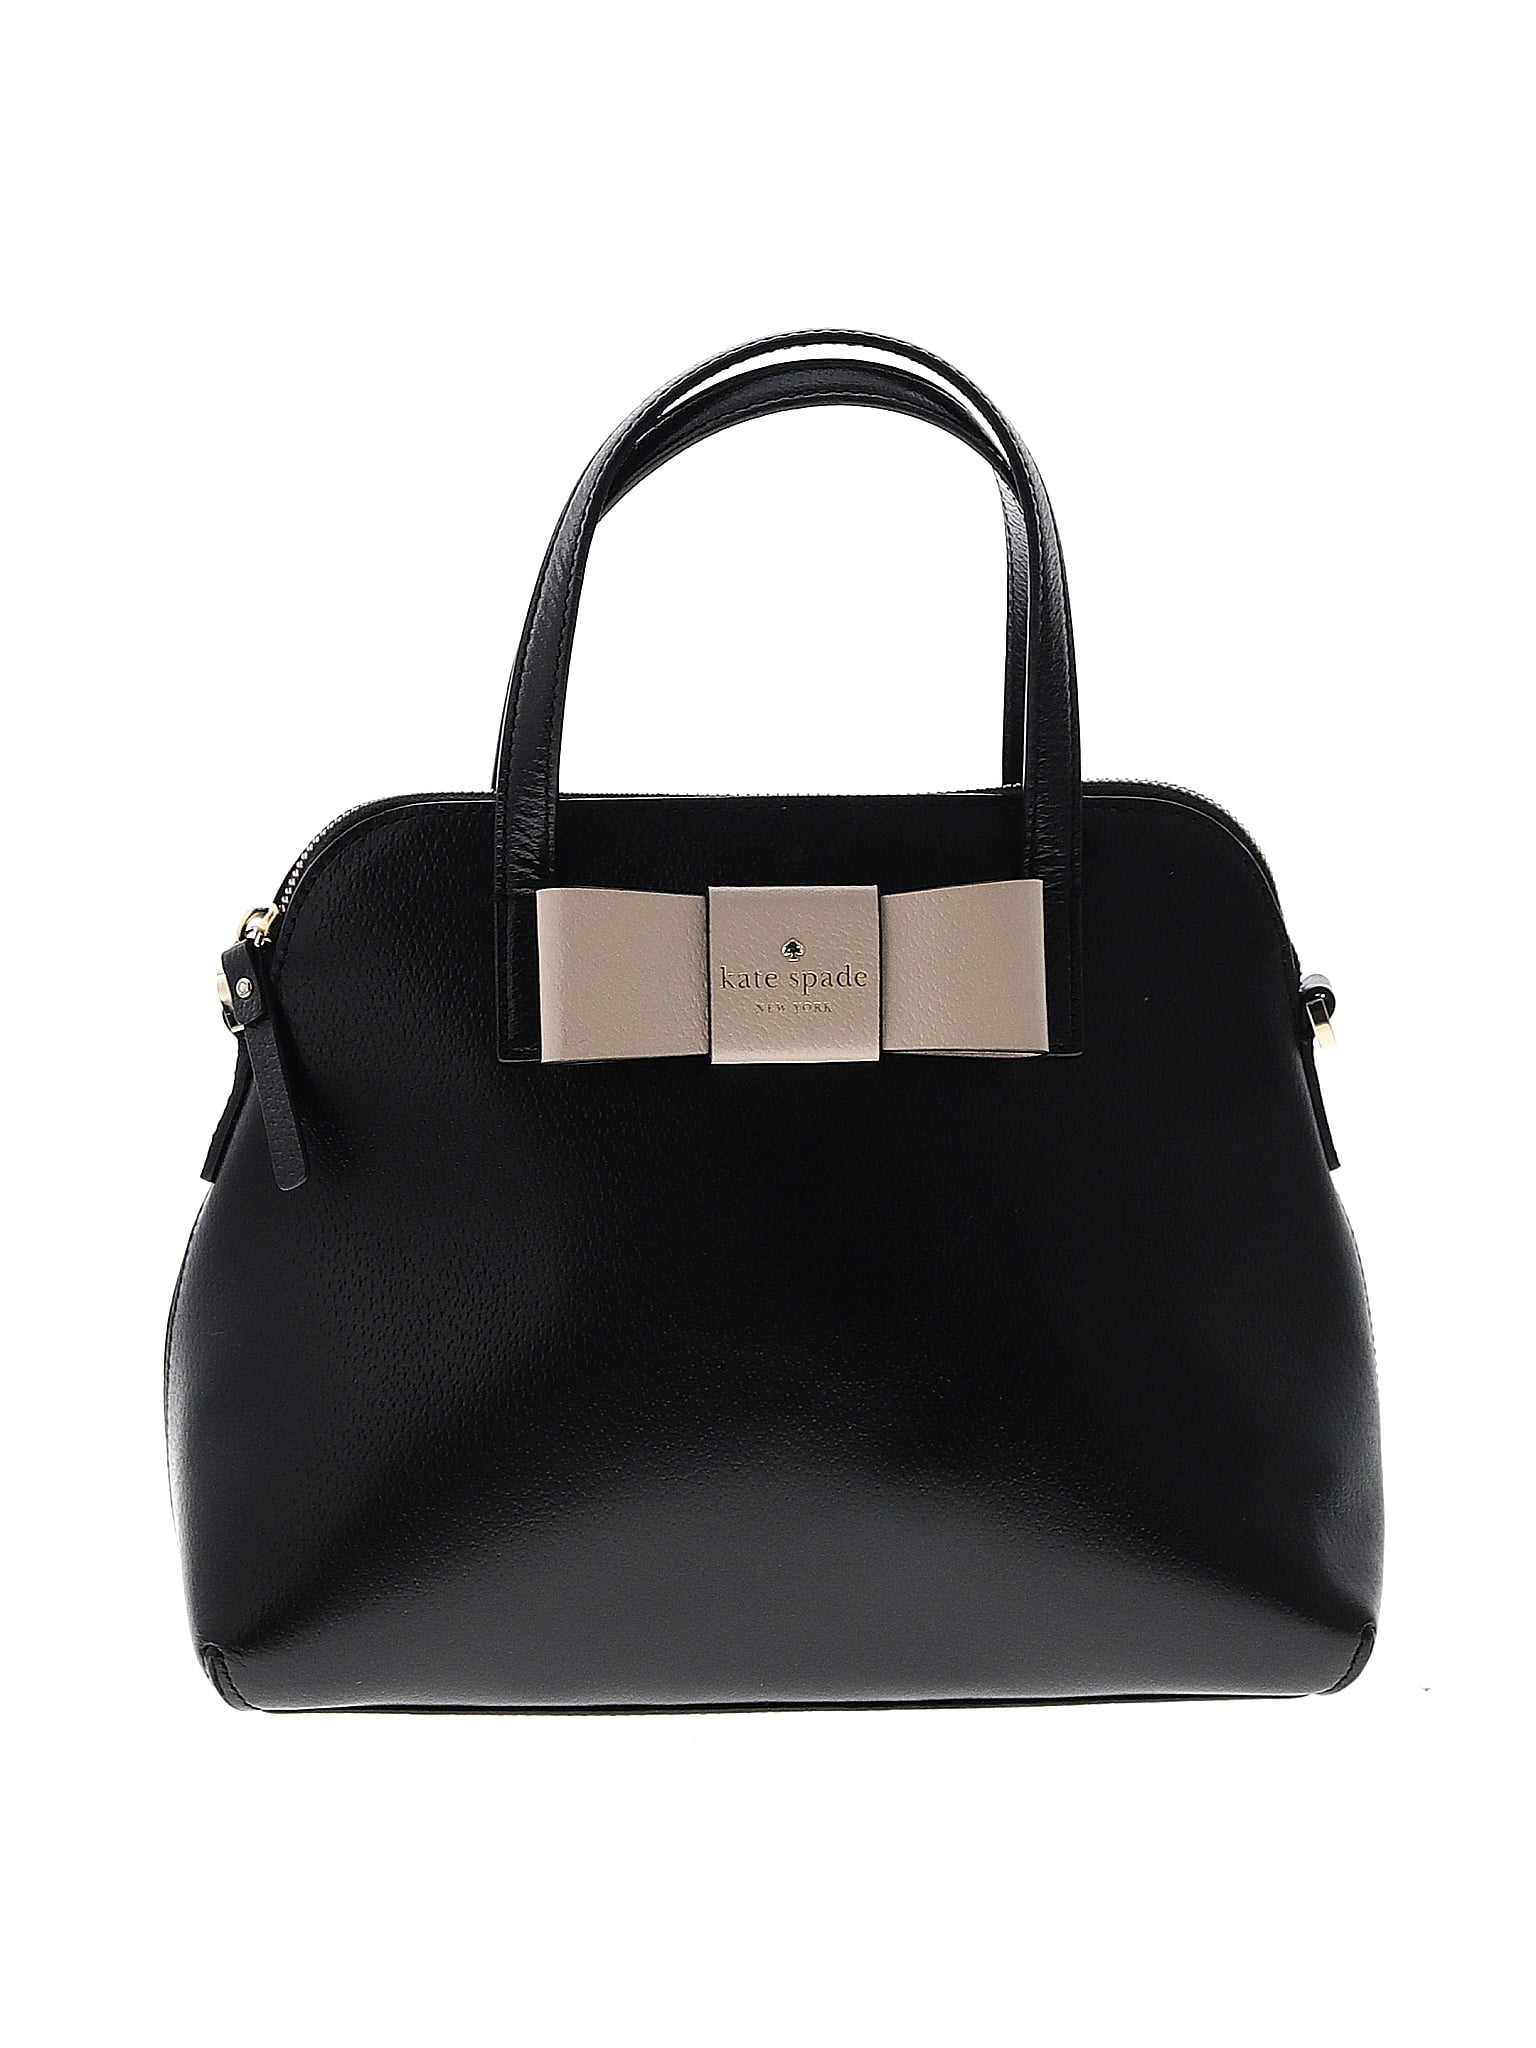 Kate Spade New York 100% Leather Black Leather Satchel One Size - 76% ...